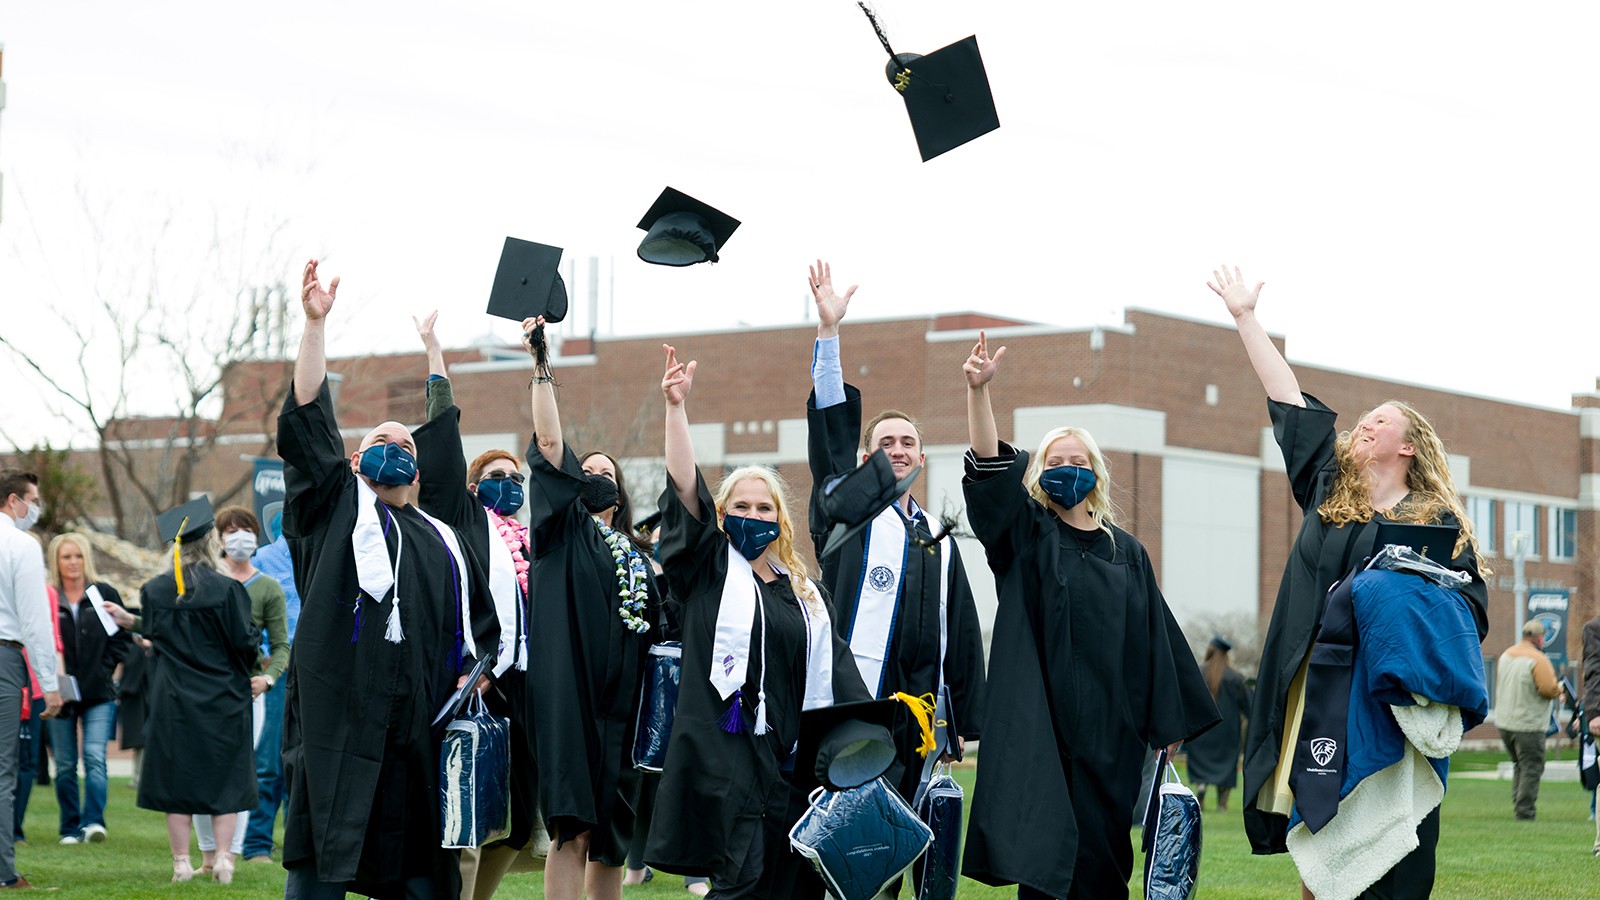 Utah State University Announces 2022 Statewide Commencement Dates